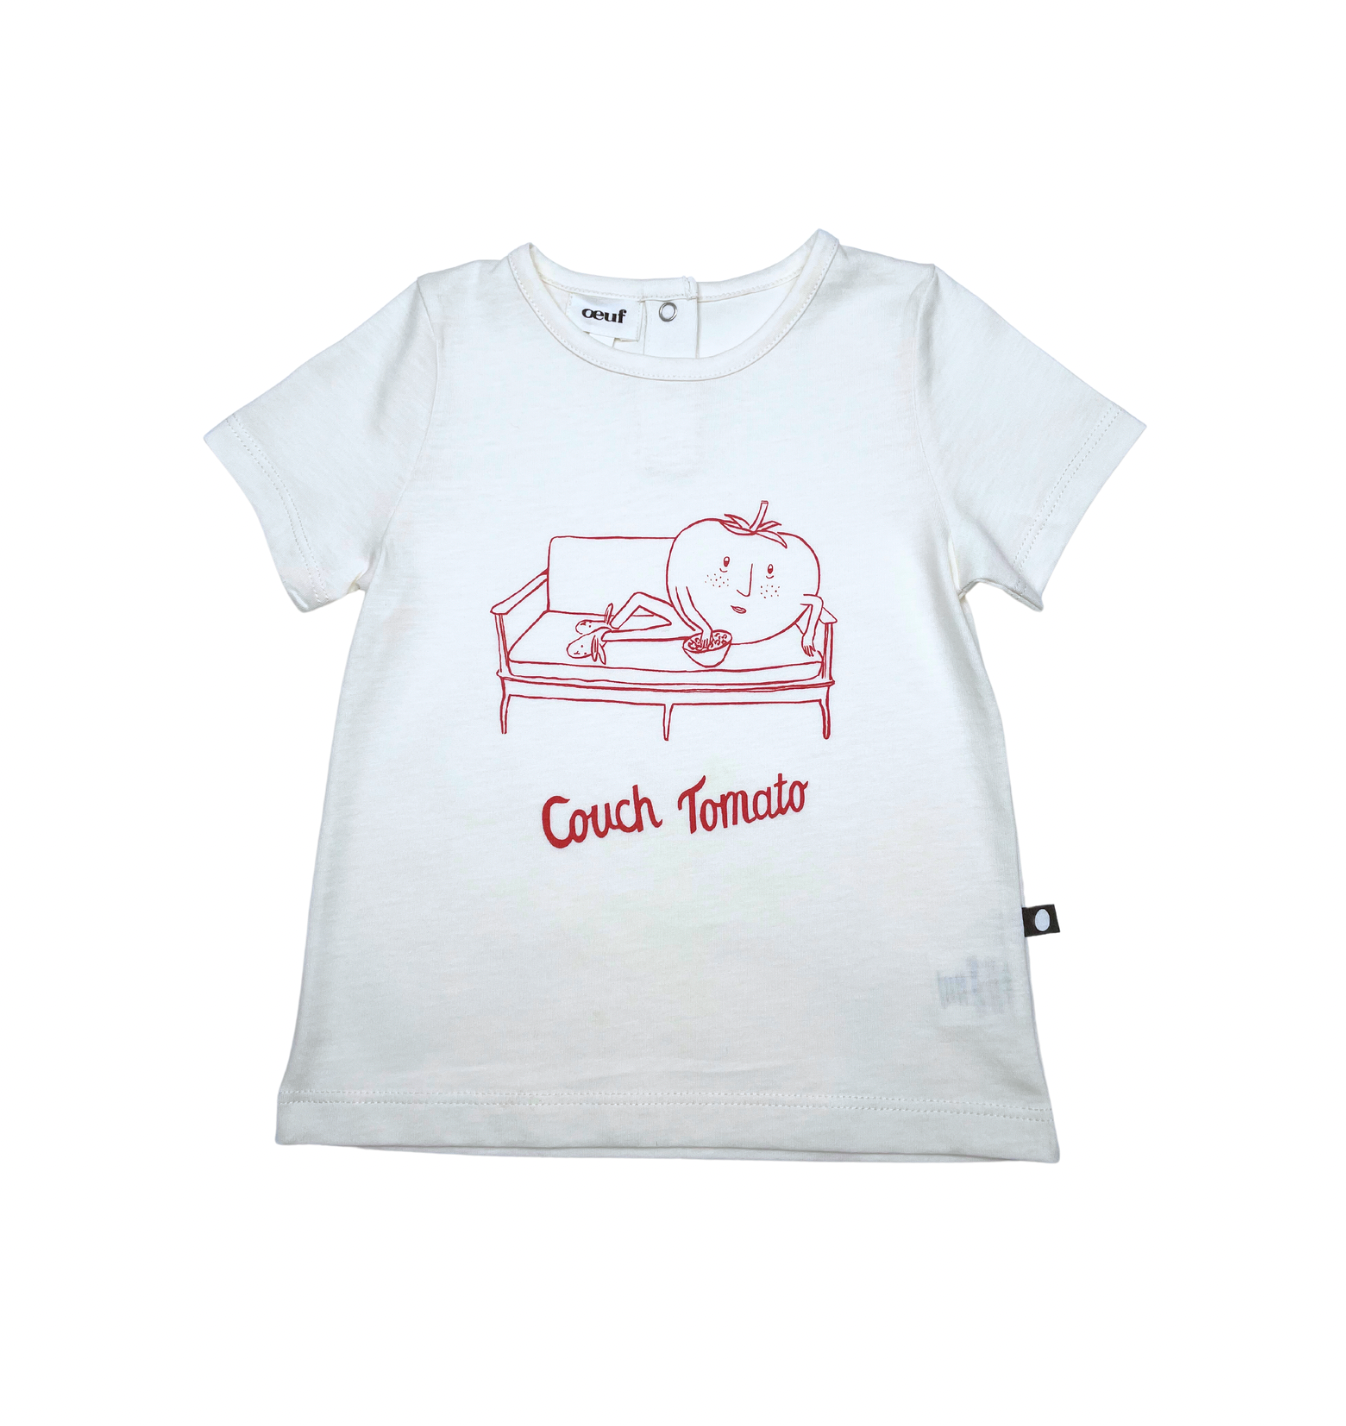 OEUF NYC - T-shirt "couch tomato" - 12 mois